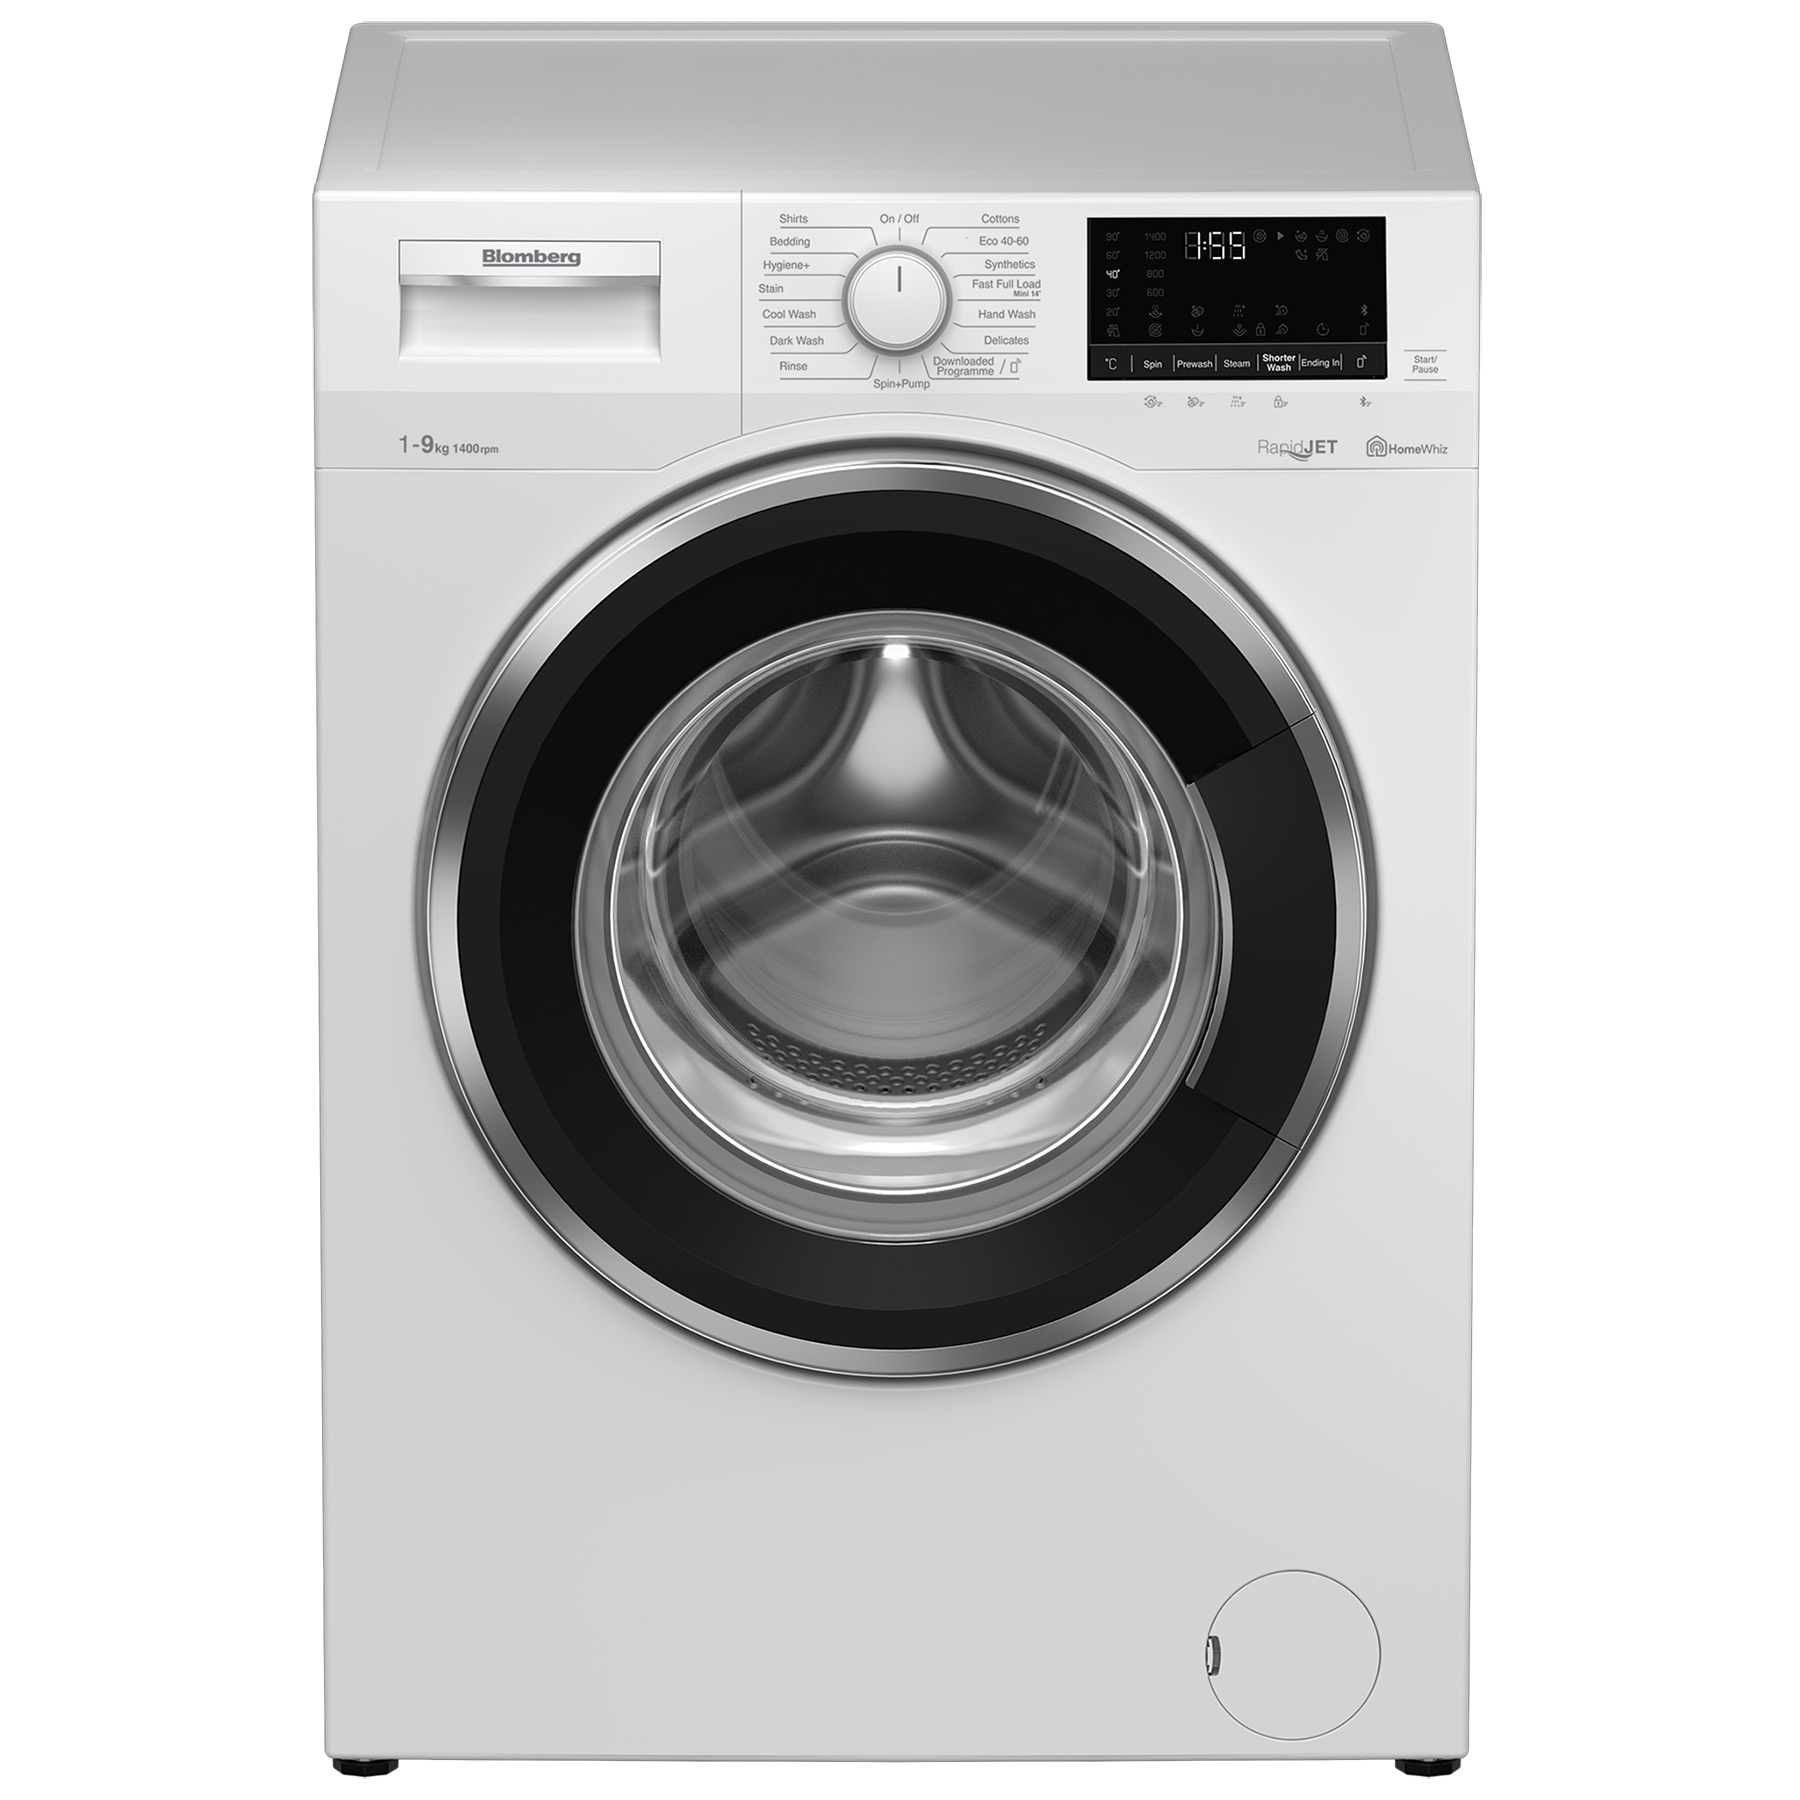 Blomberg LWF194520QW Washing Machine in White 1400rpm 9kg A Rated 3yr